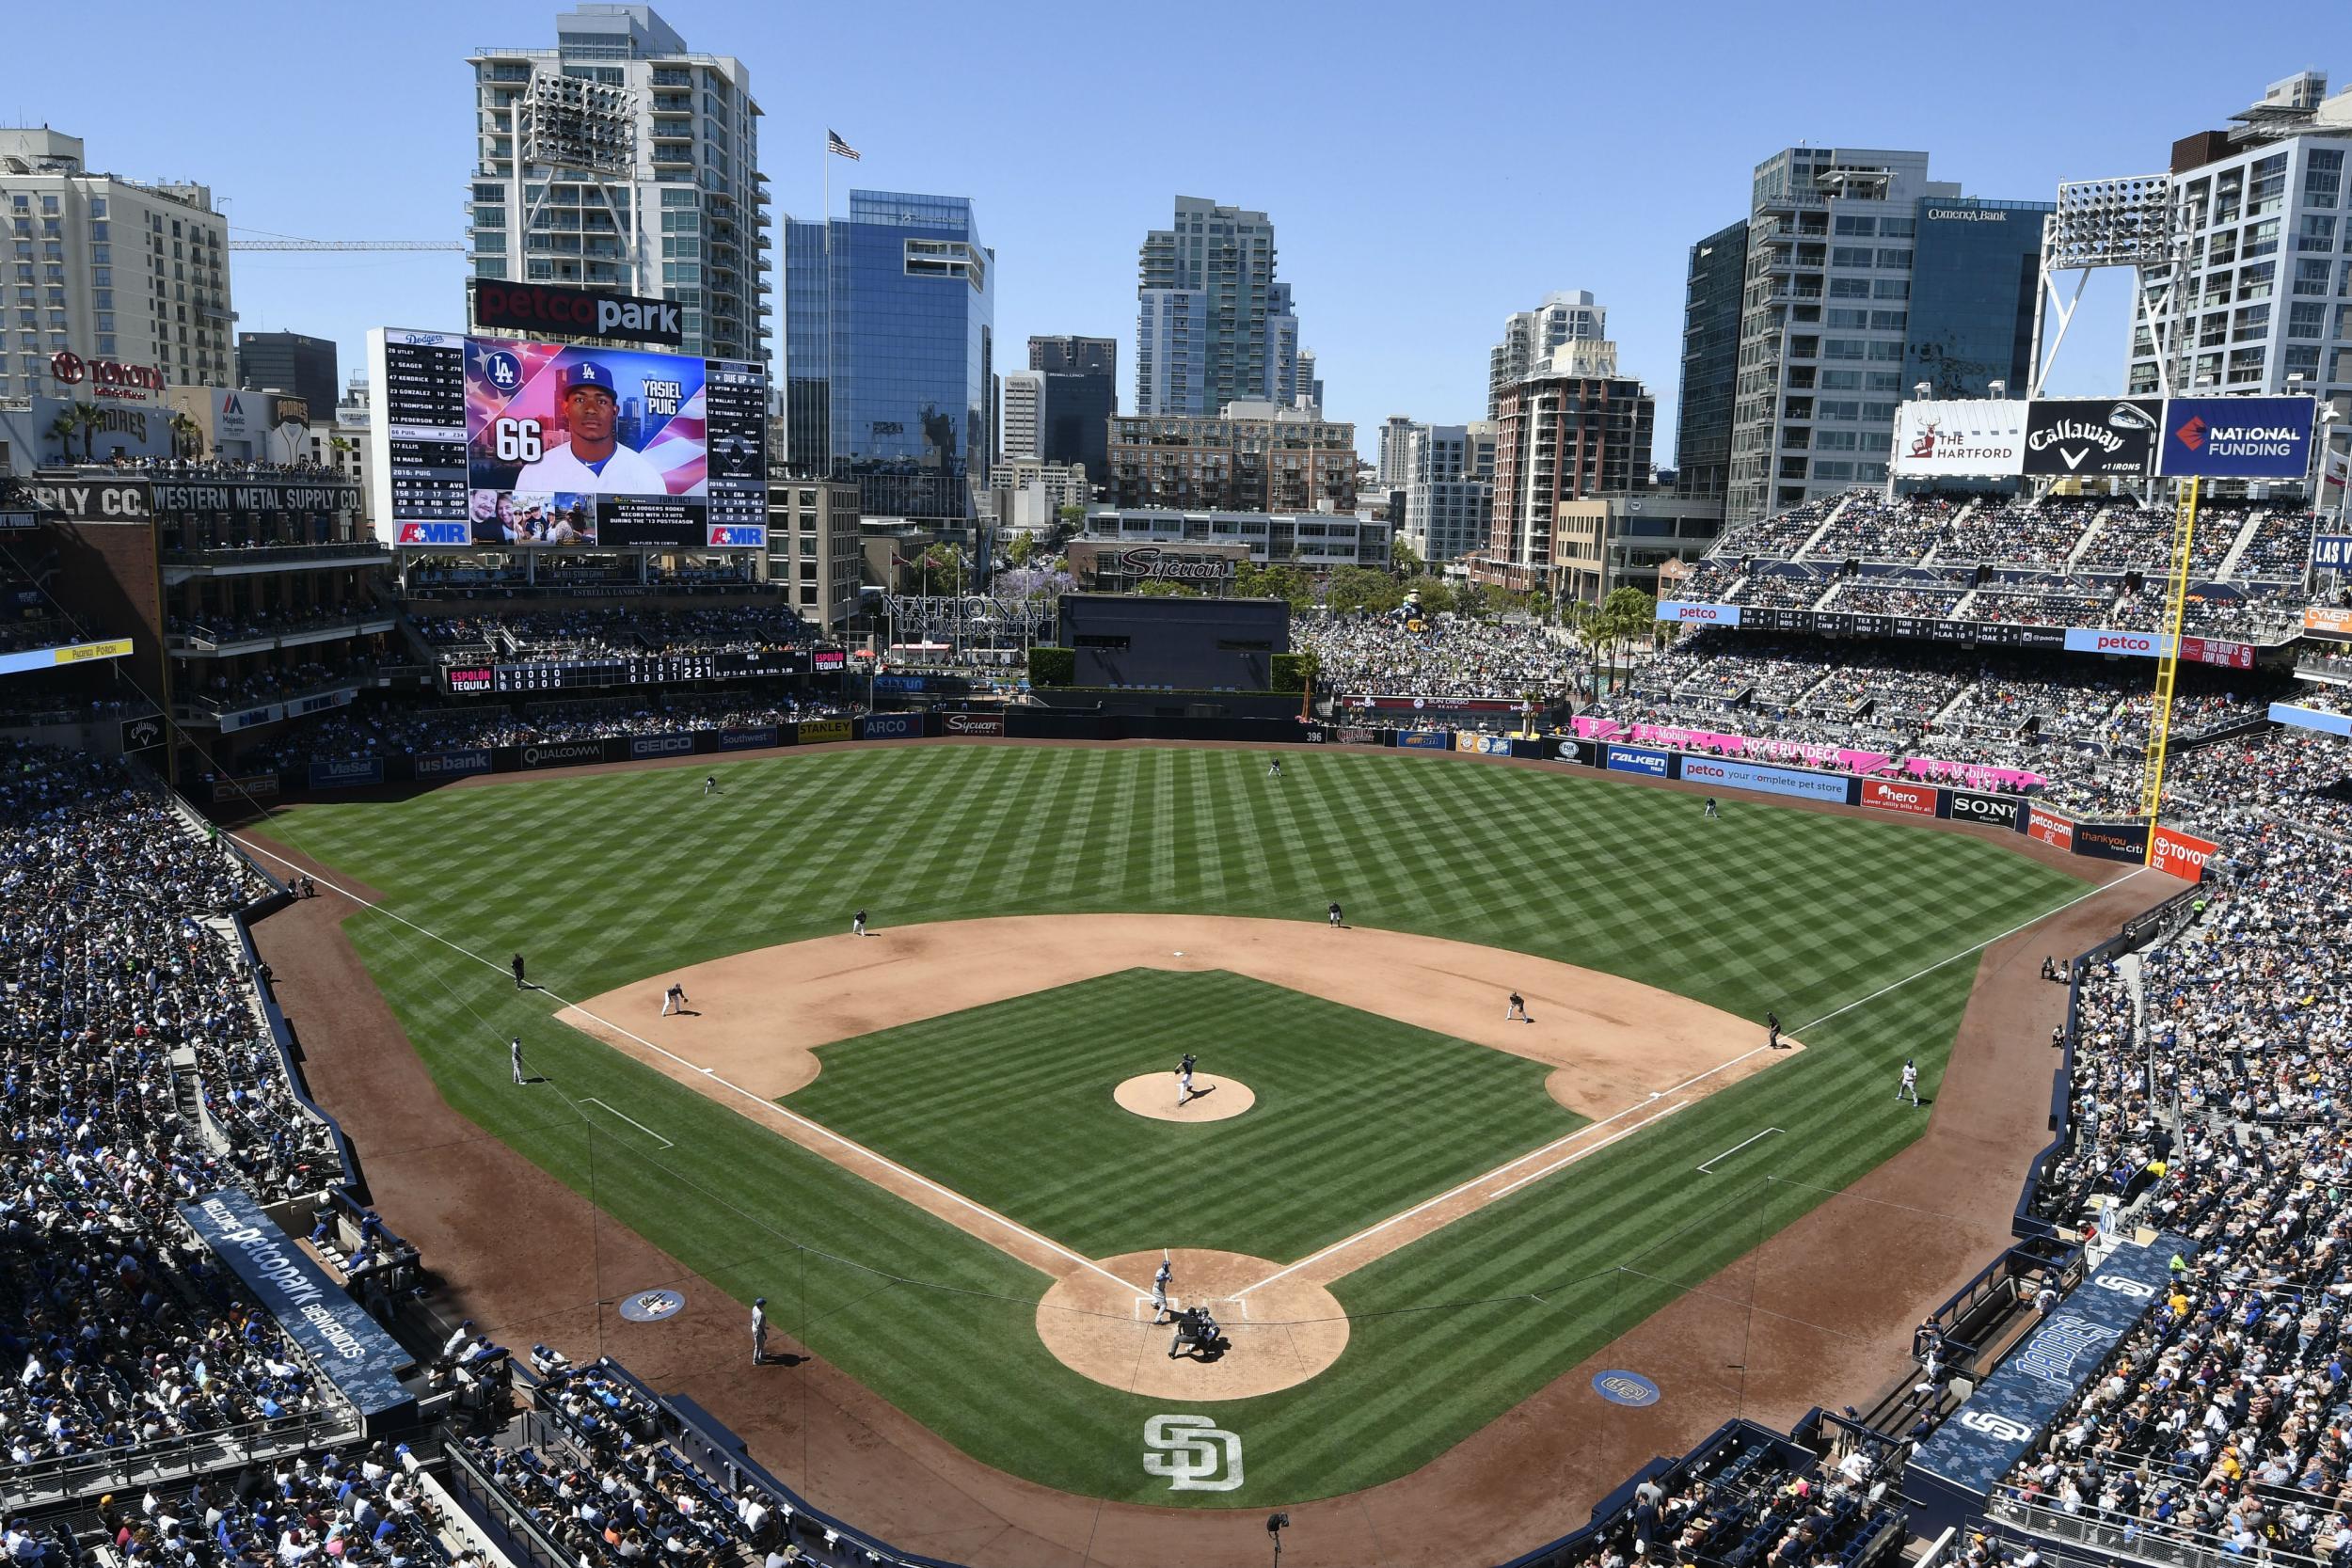 Petco Park, home to the Padres